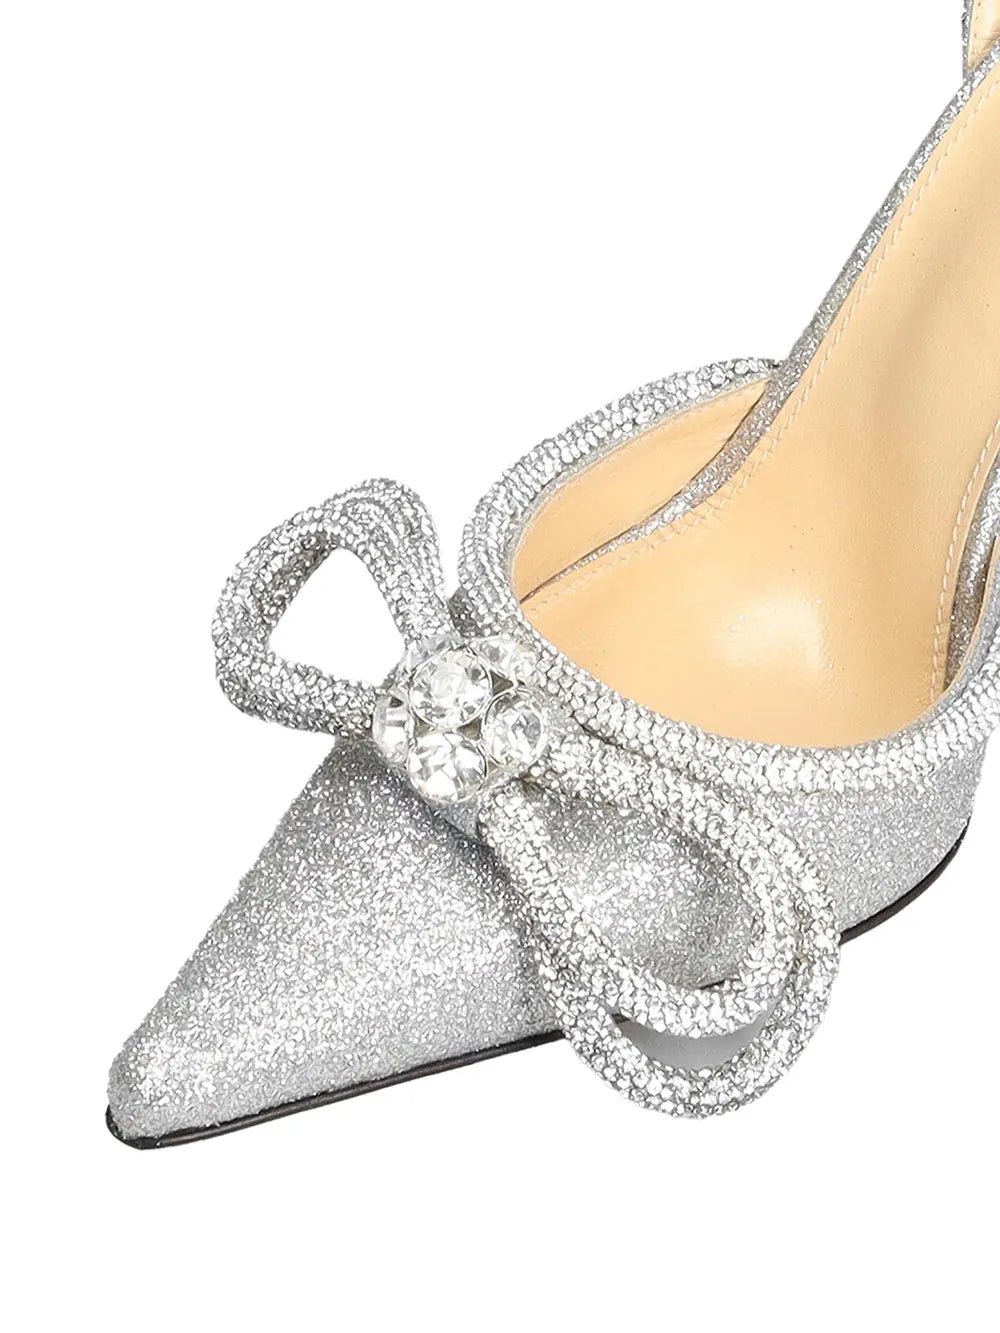 MACH &amp; MACH shoes for rent - with sparkles and bows decorated with crystals